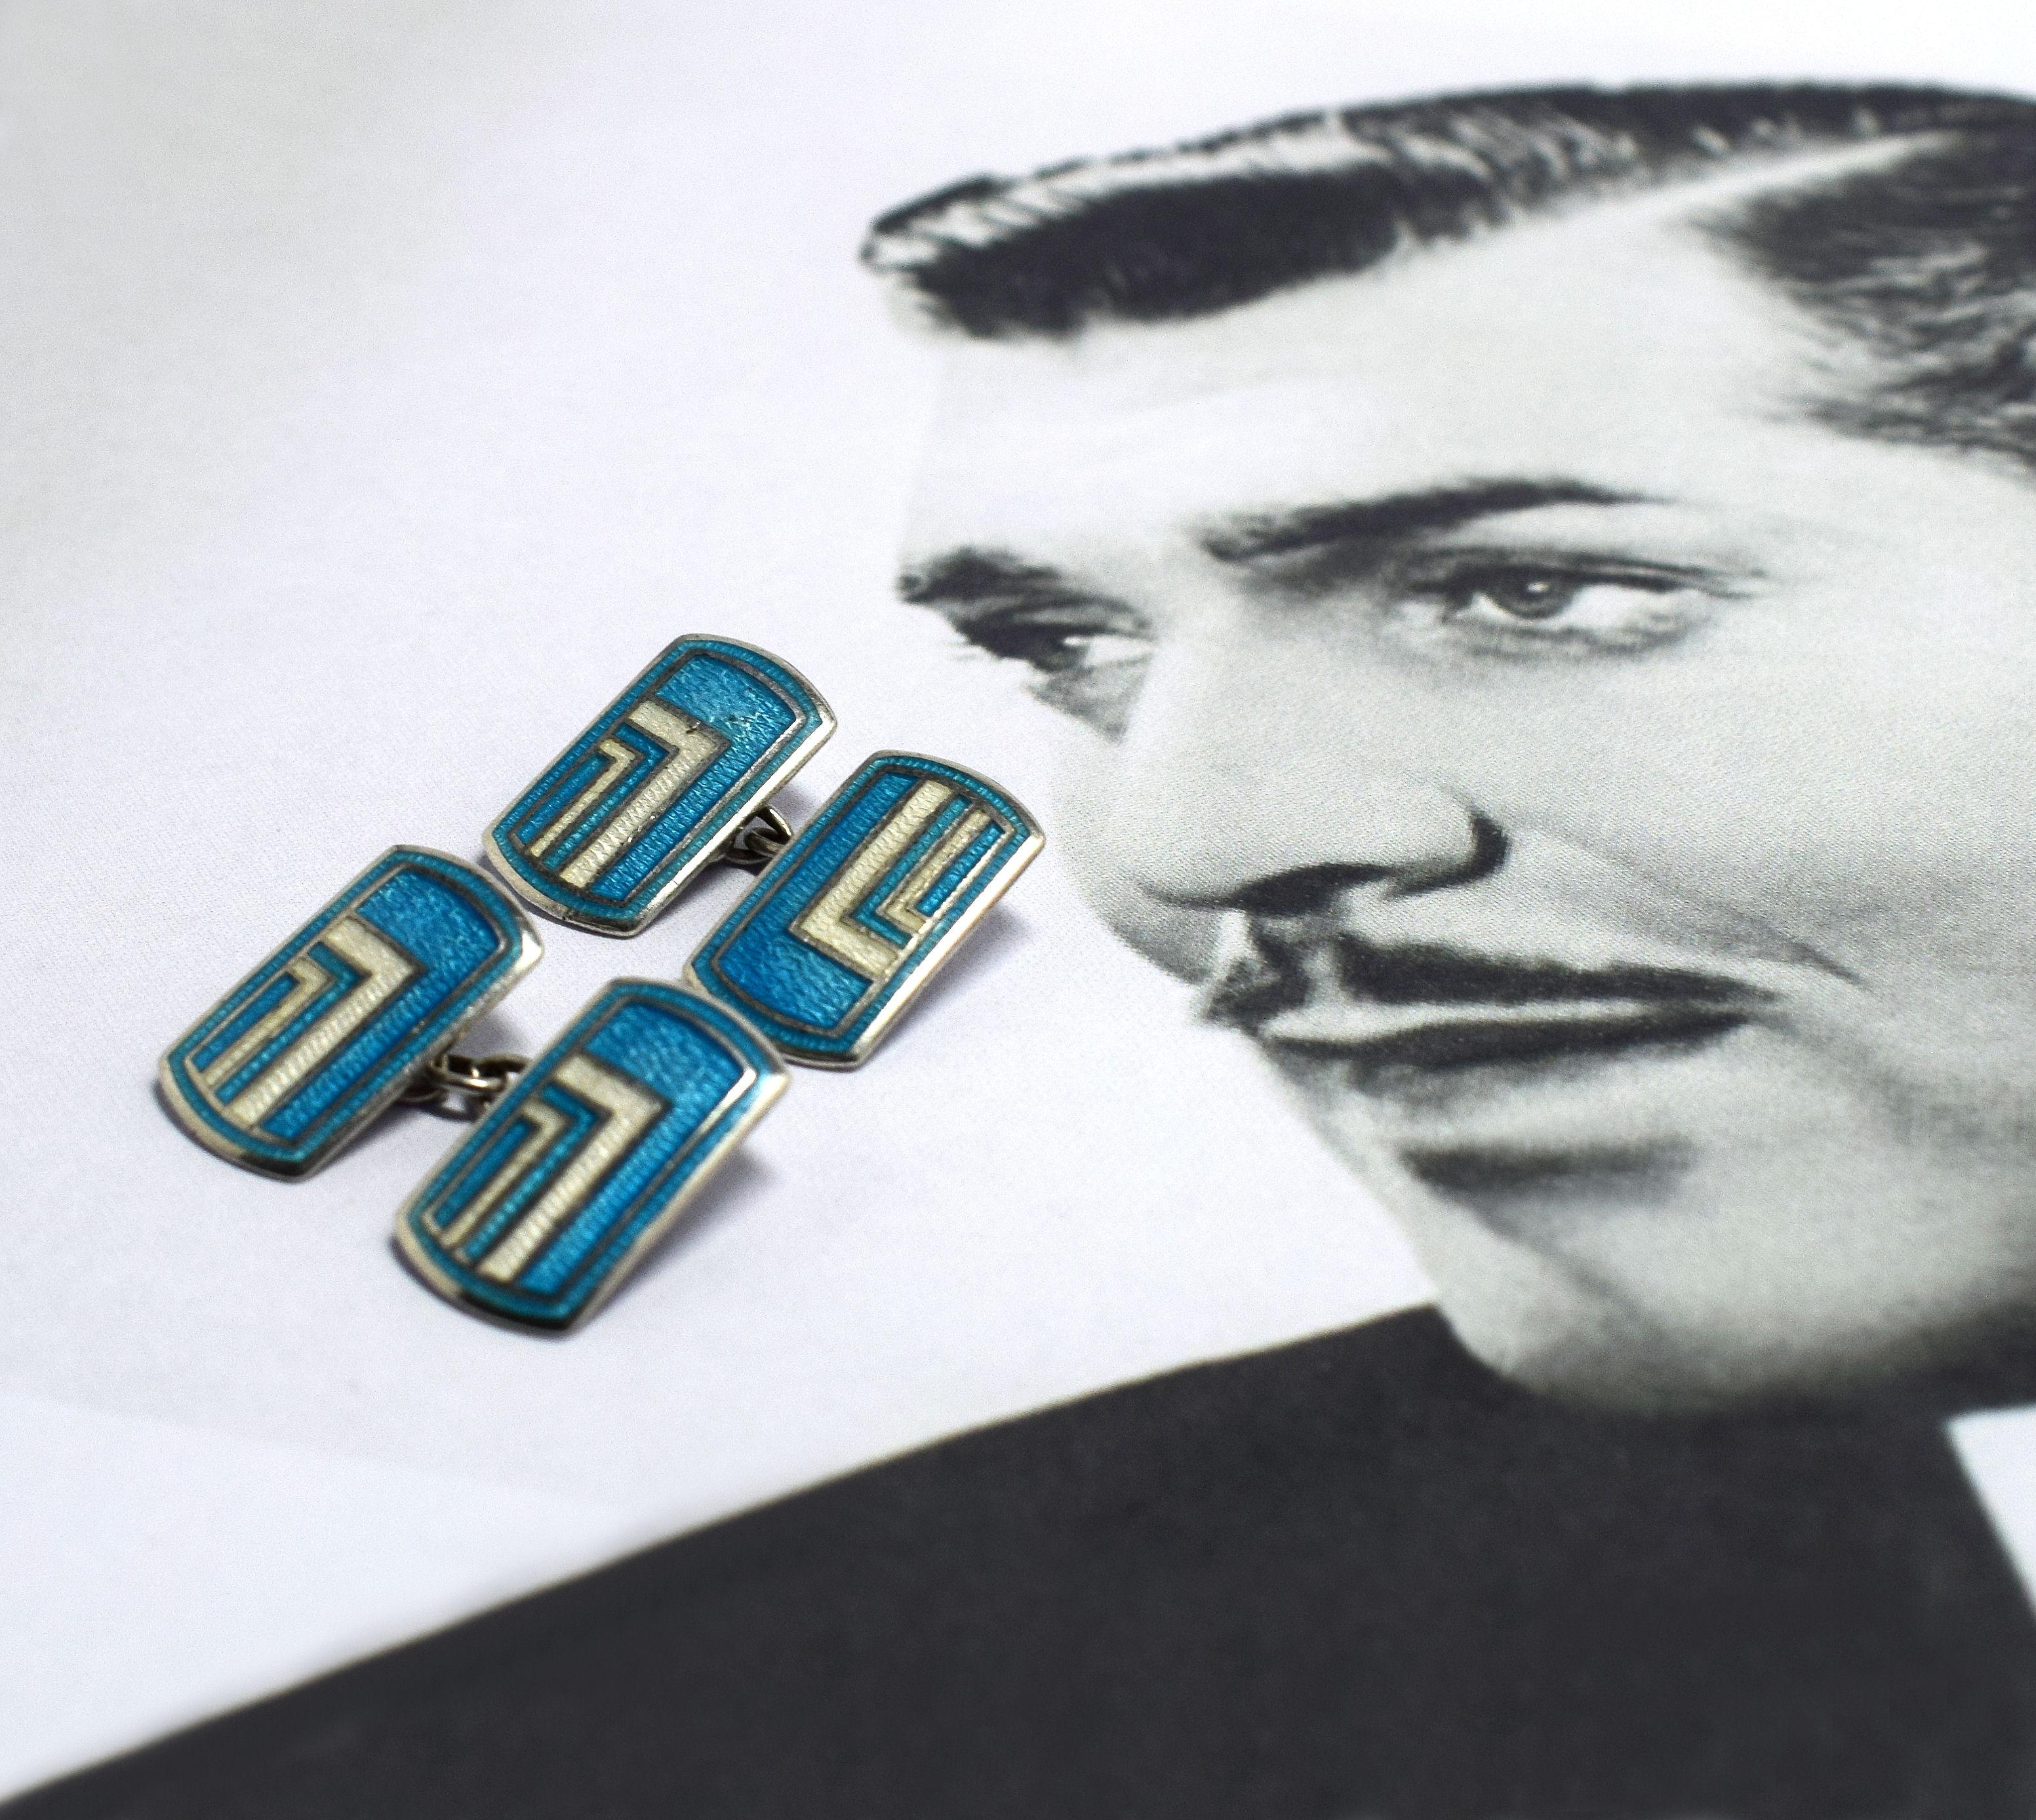 For your consideration are these rare and fabulously styled 1930s Art Deco geometric Guilloche enamel and sterling silver gents cufflinks. English made double cufflinks which feature the most dramatic geometric Art Deco design in blue, white and